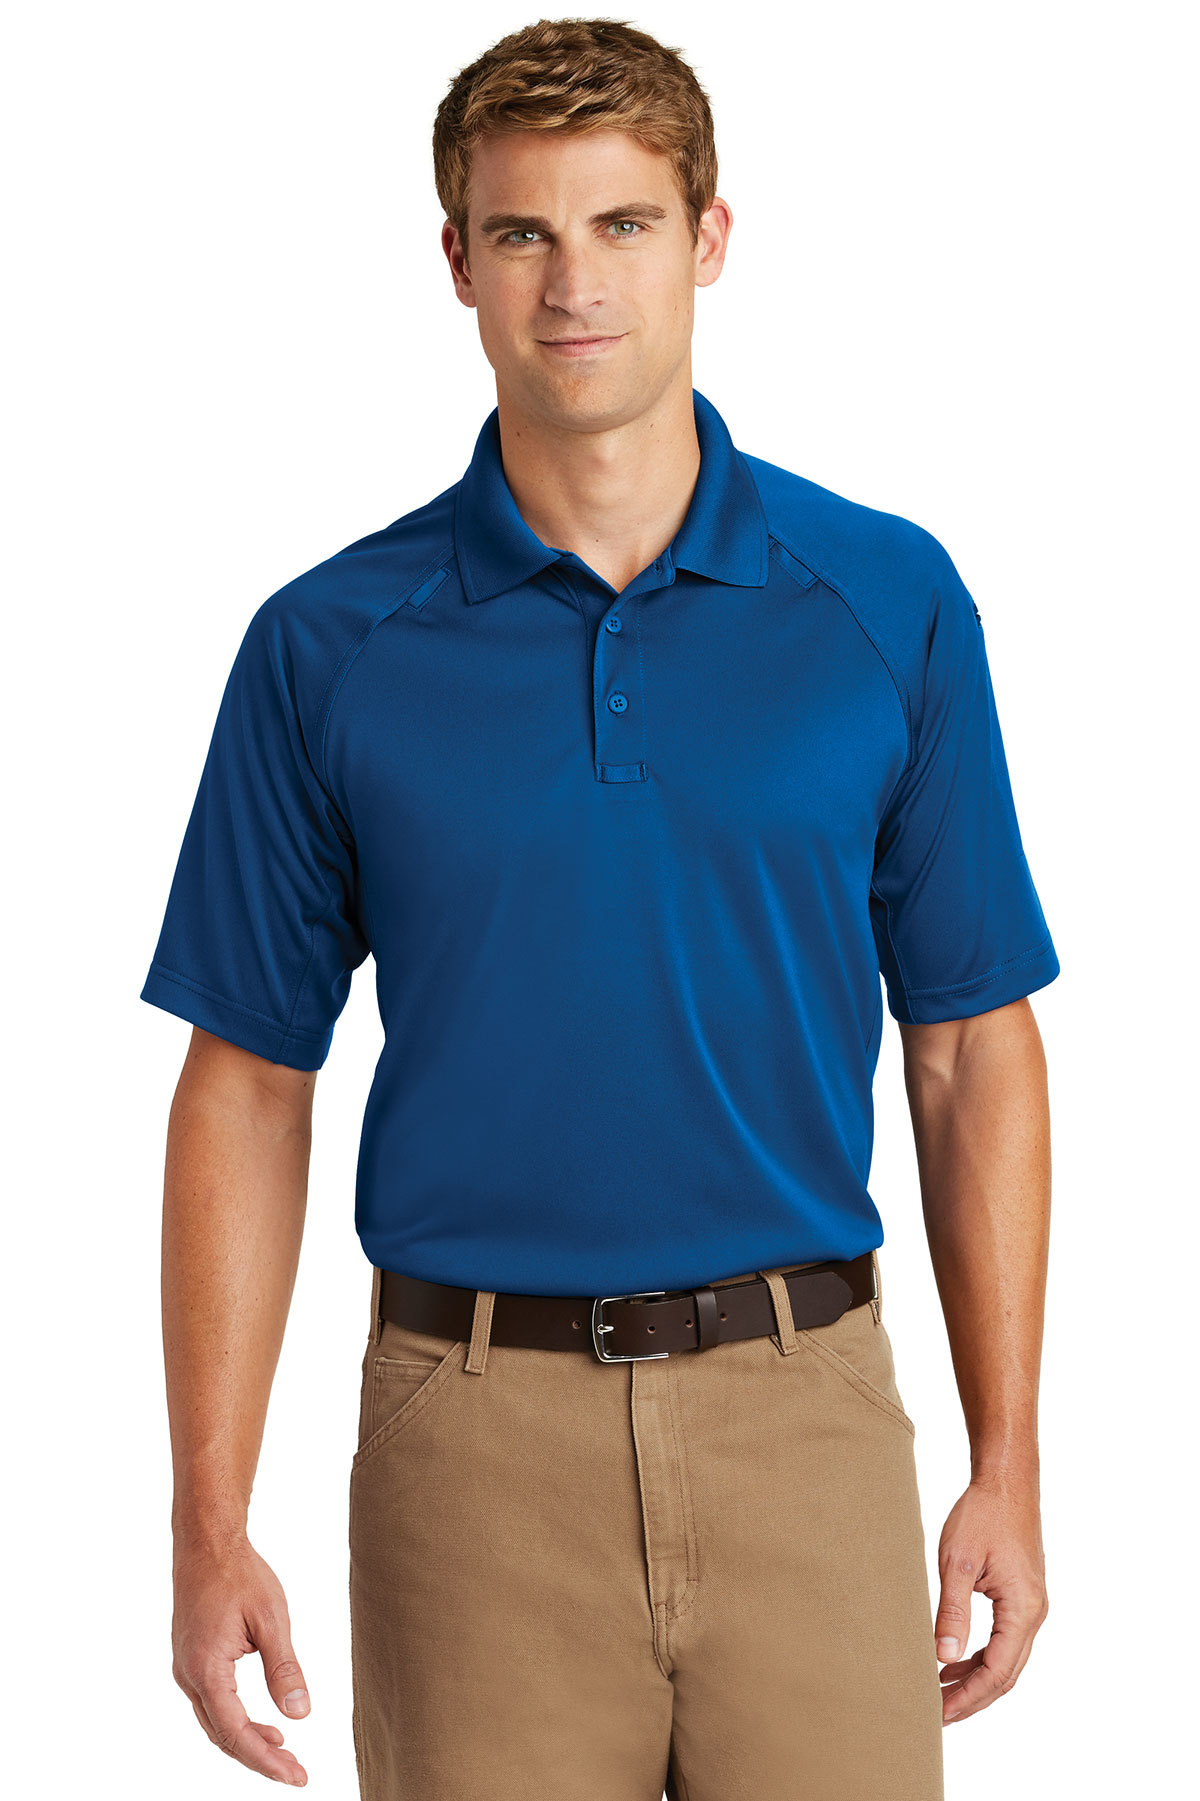 CornerStone Tall Select Snag-Proof Tactical Polo | Product | Company ...